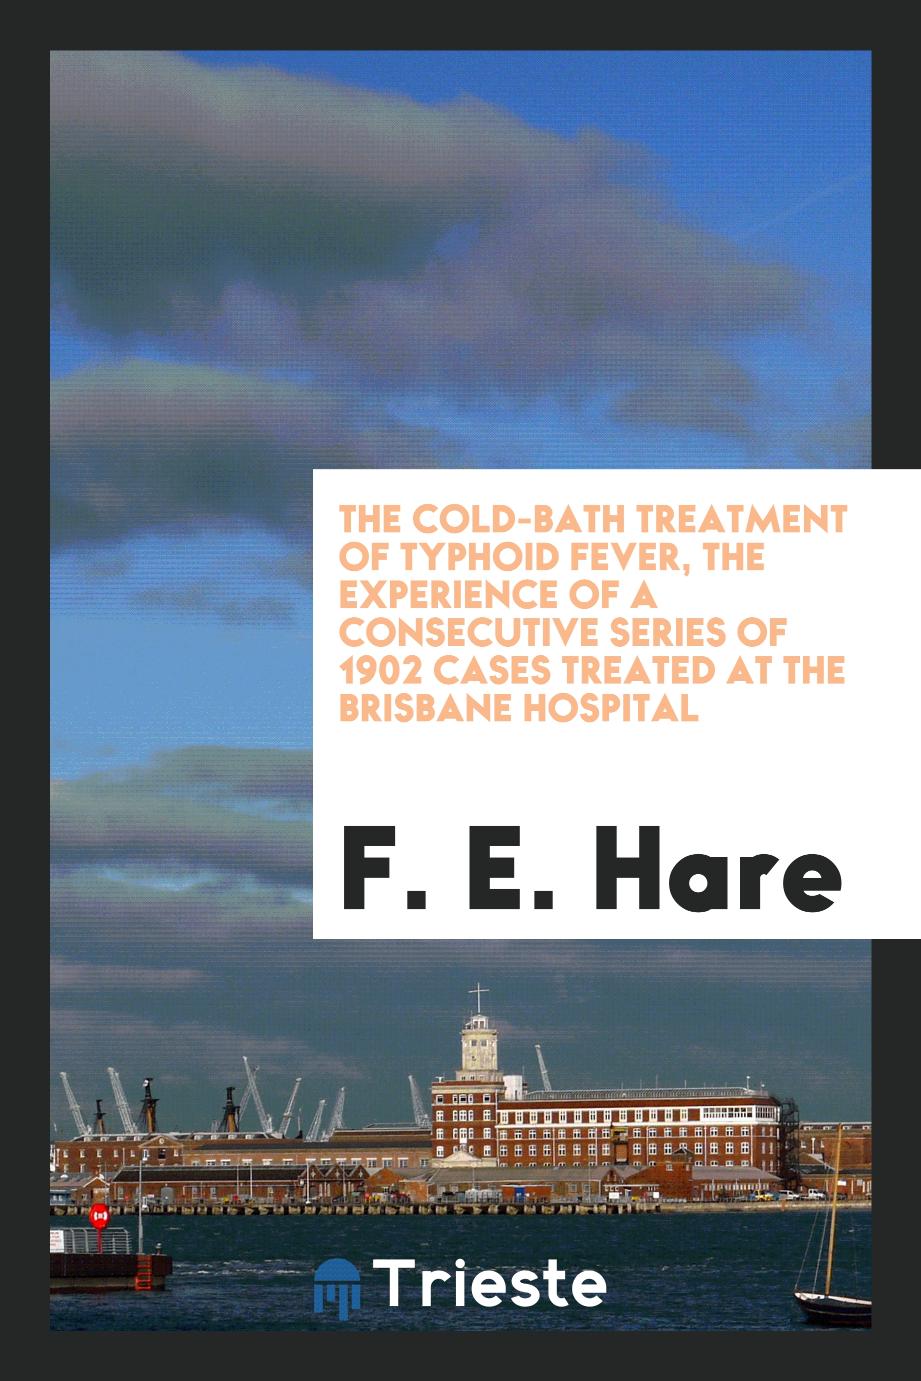 The cold-bath treatment of typhoid fever, the experience of a consecutive series of 1902 cases treated at the Brisbane Hospital